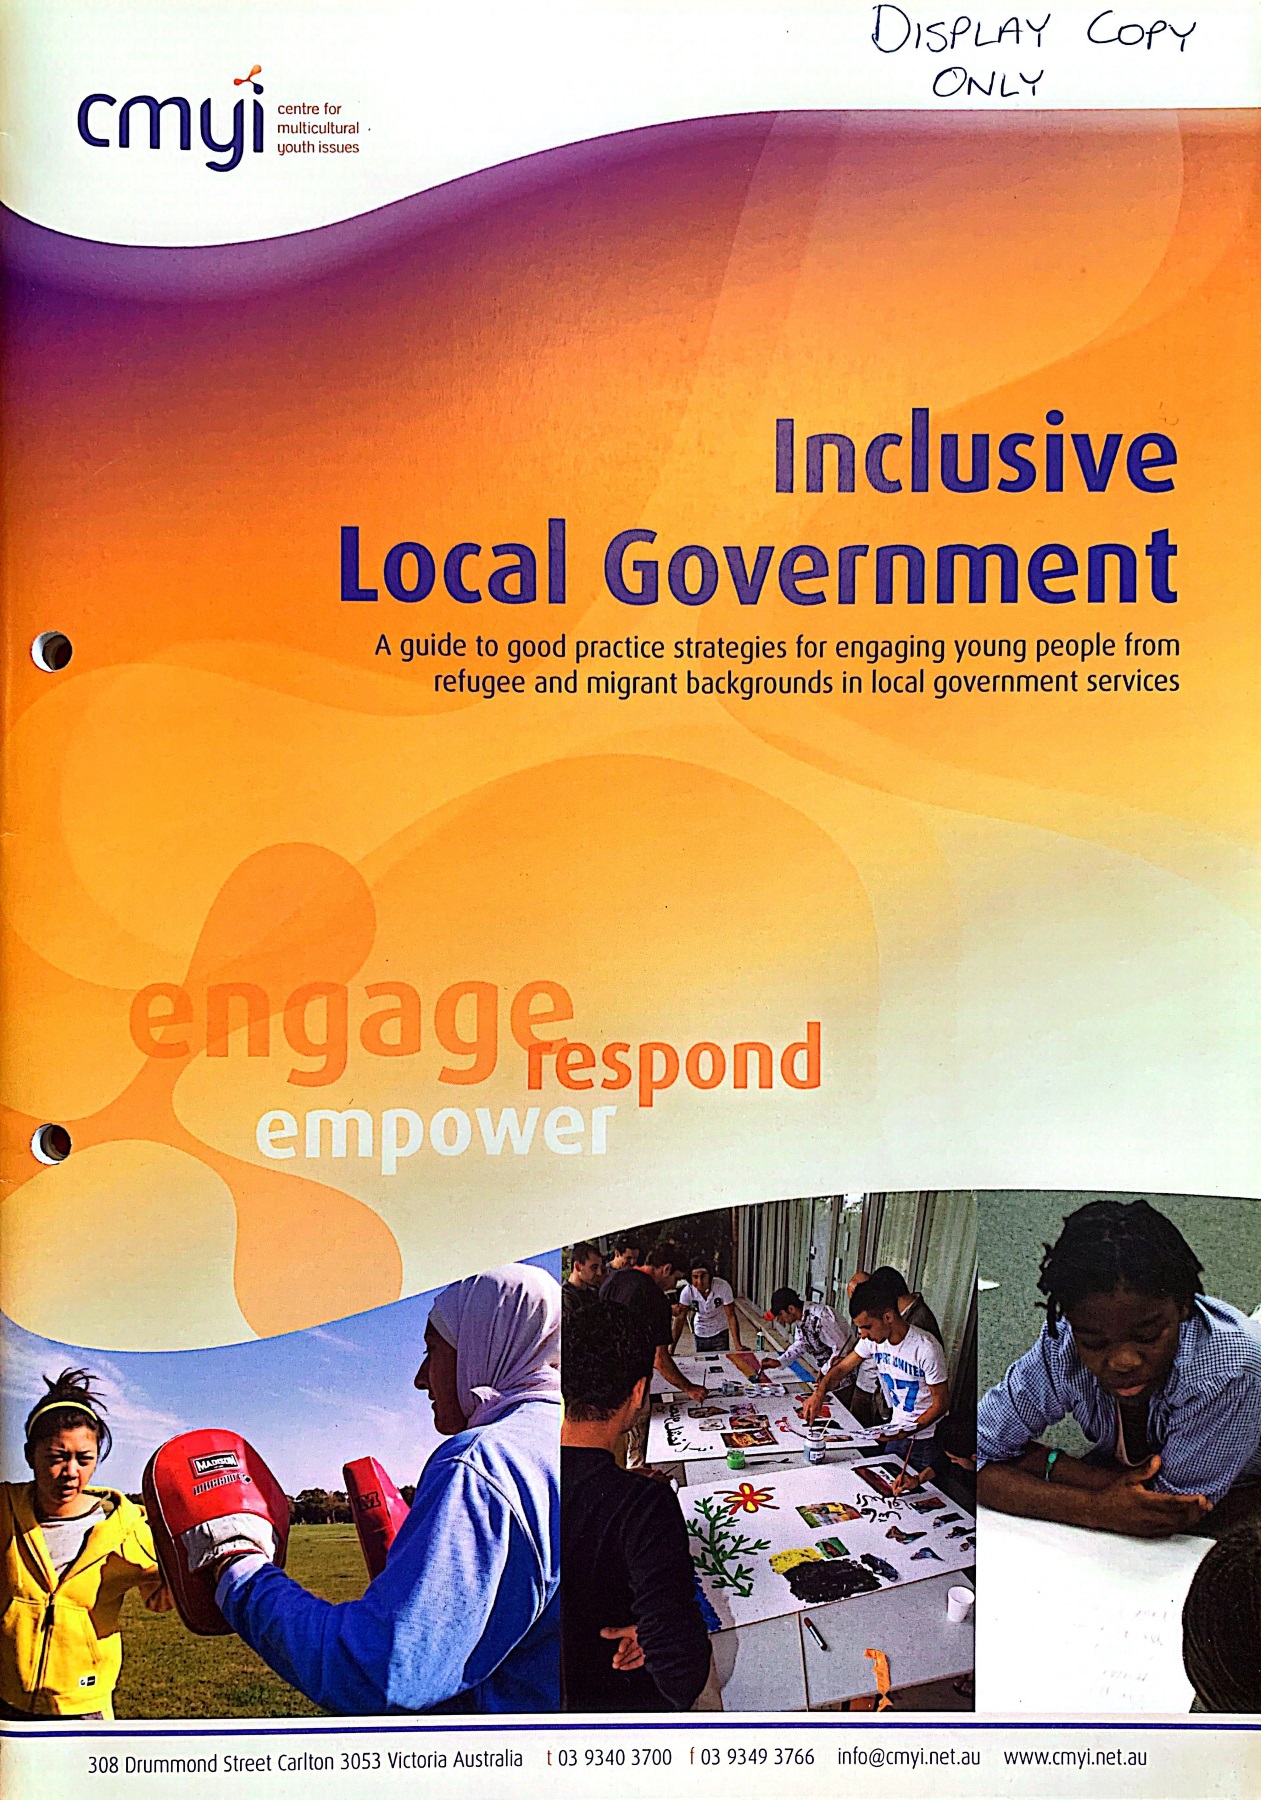 Cover of the Inclusive Local Government guide for best practice when engaging with young people from refugee and migrant backgrounds.